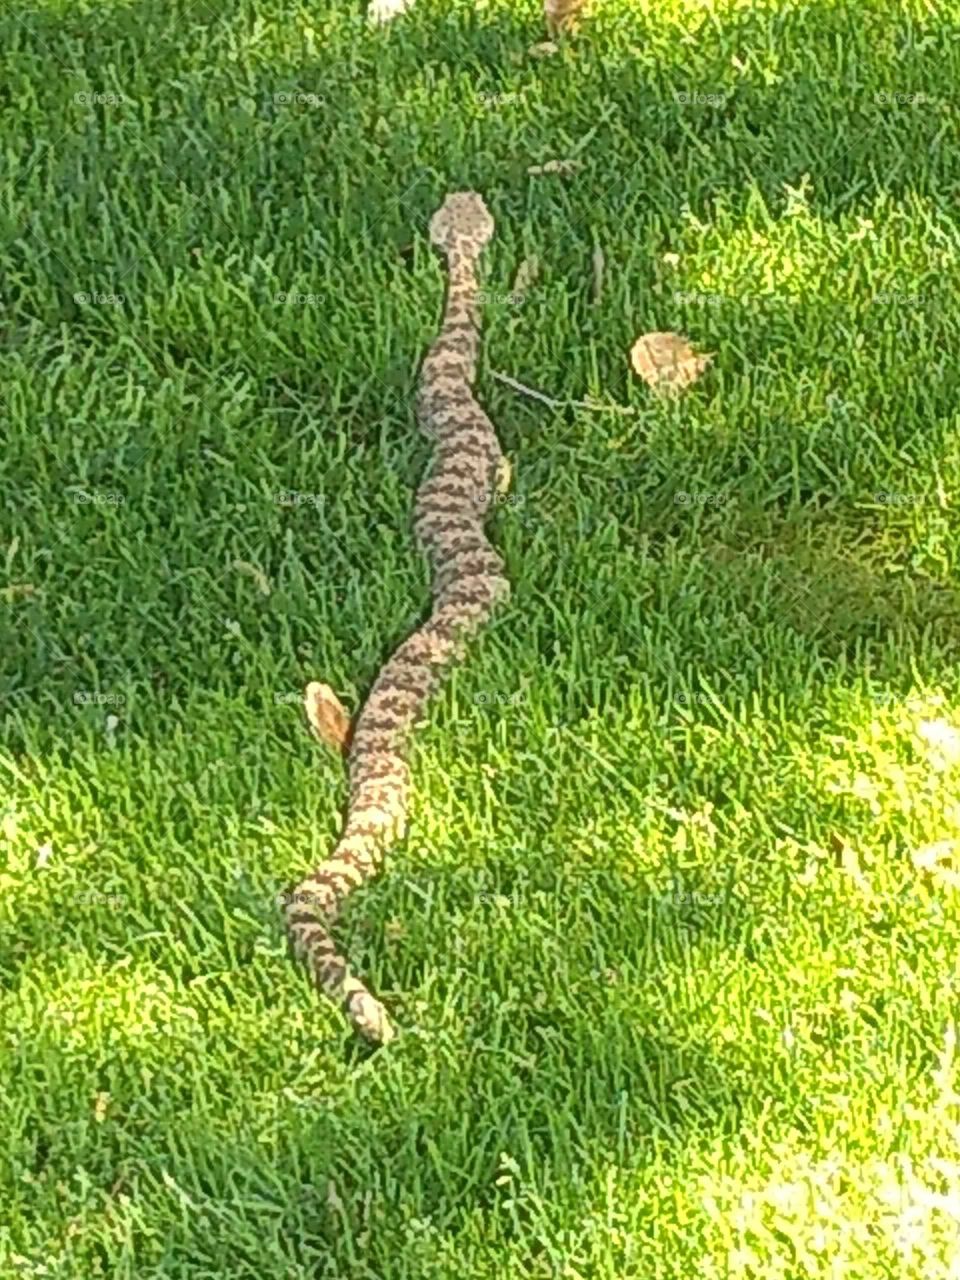 rattlesnake crossing a golf course in Temecula California